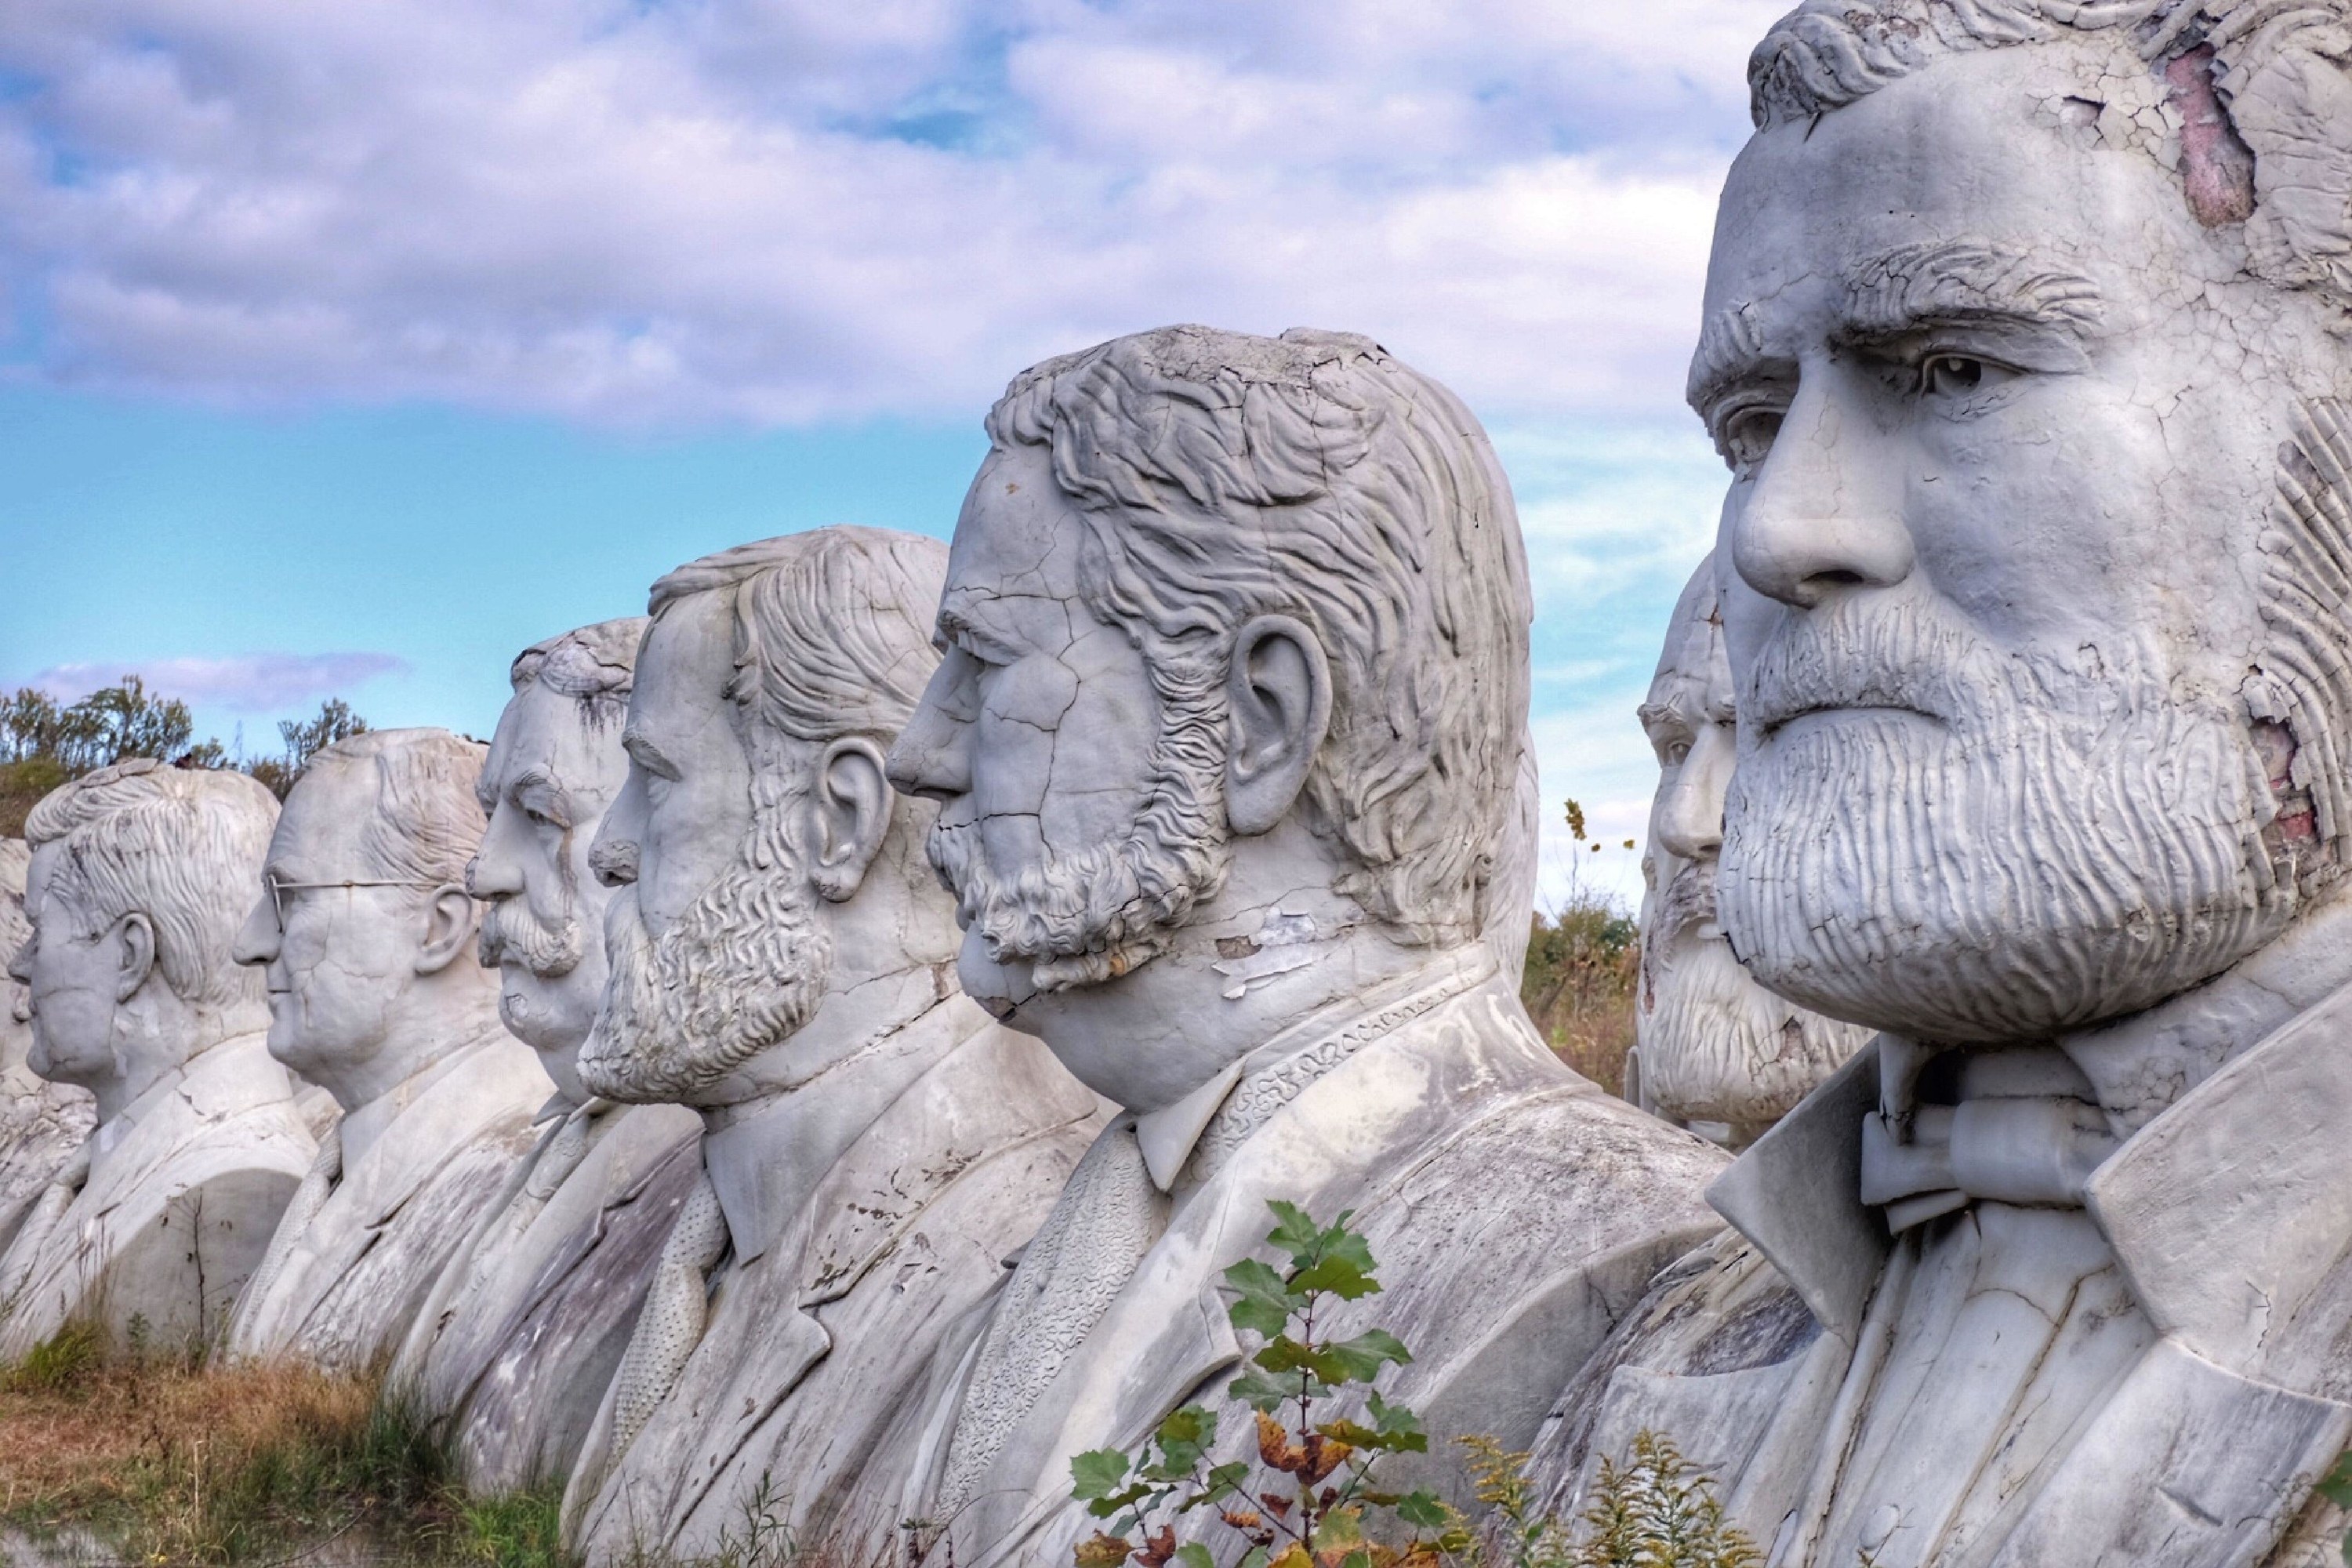 Several very large presidential busts are lined up side by side in a field